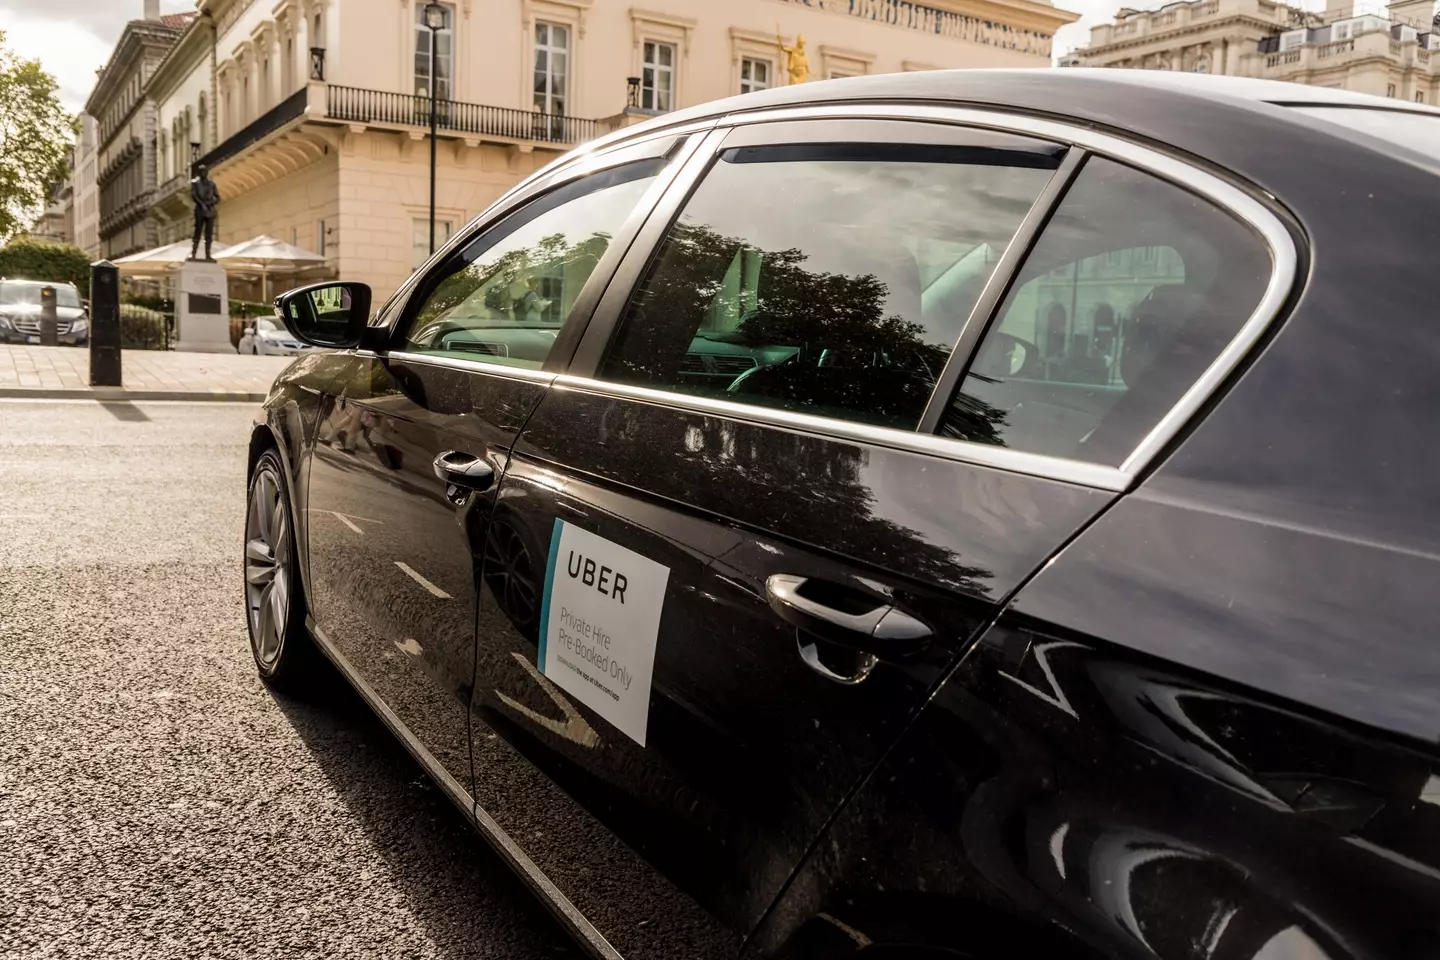 Uber drivers reportedly have to pay a lot of fees.